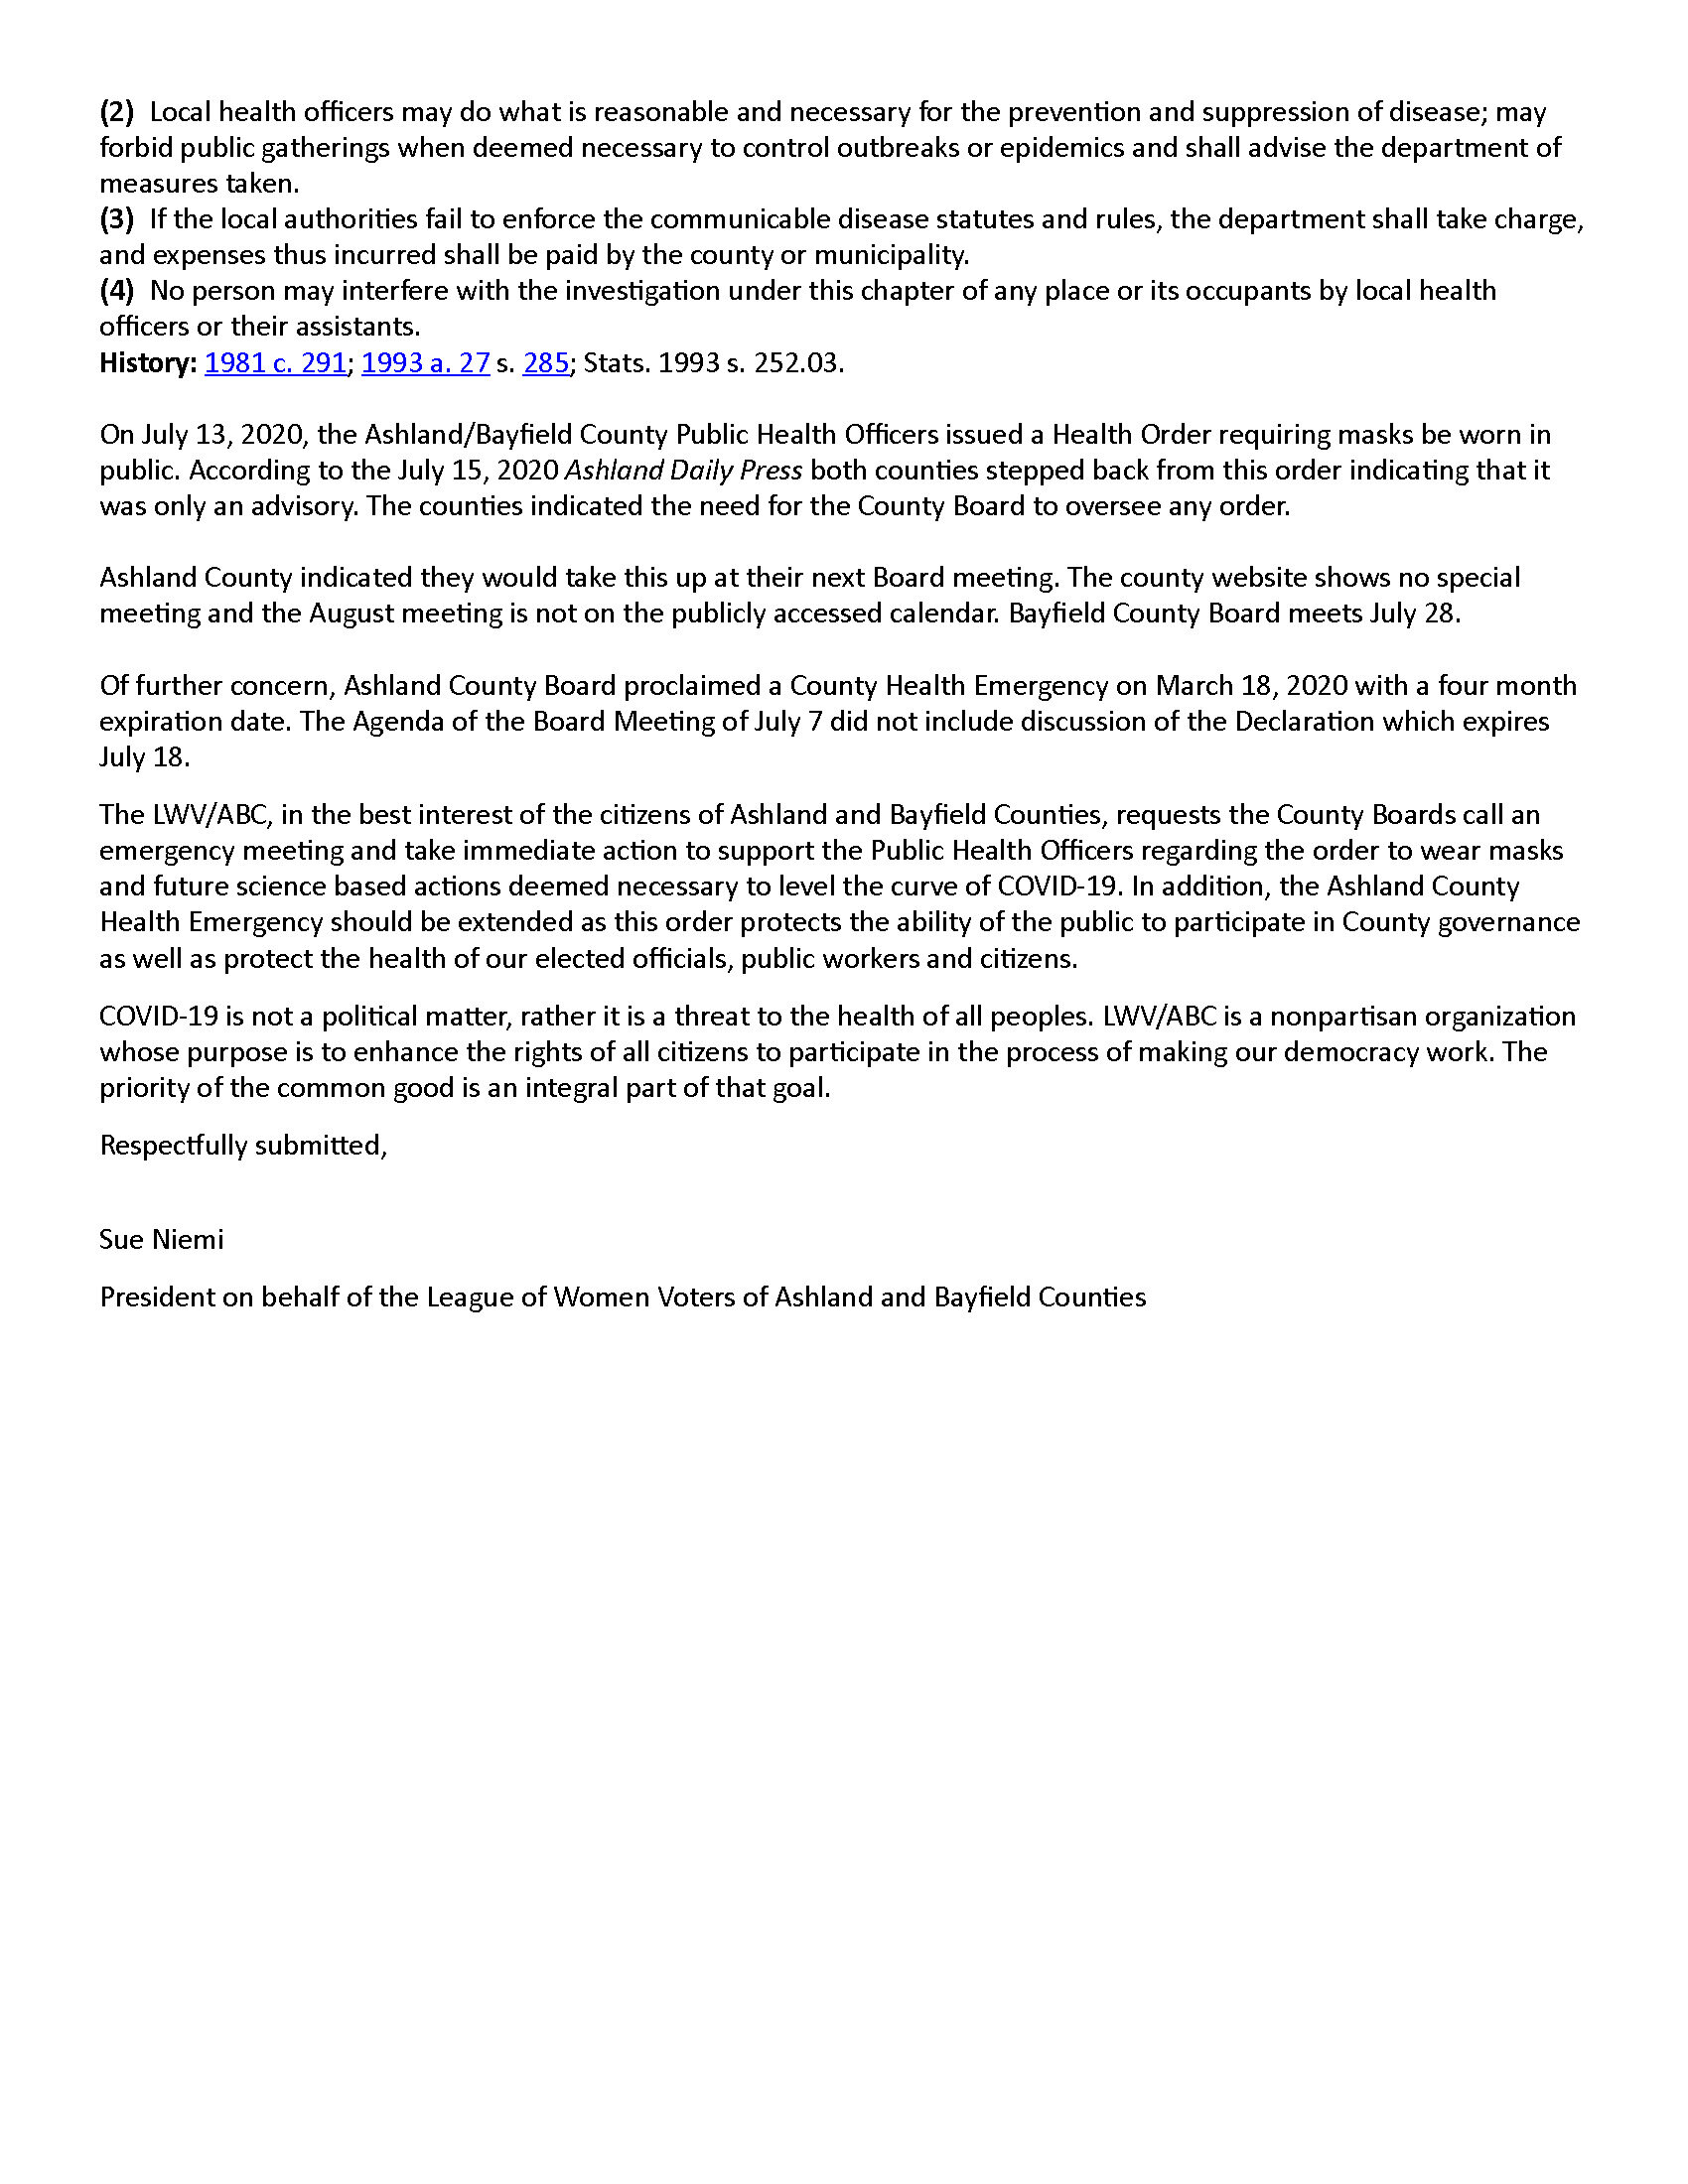 Public Health Support Letter to Ashland County Board 071720_Page_2.jpg